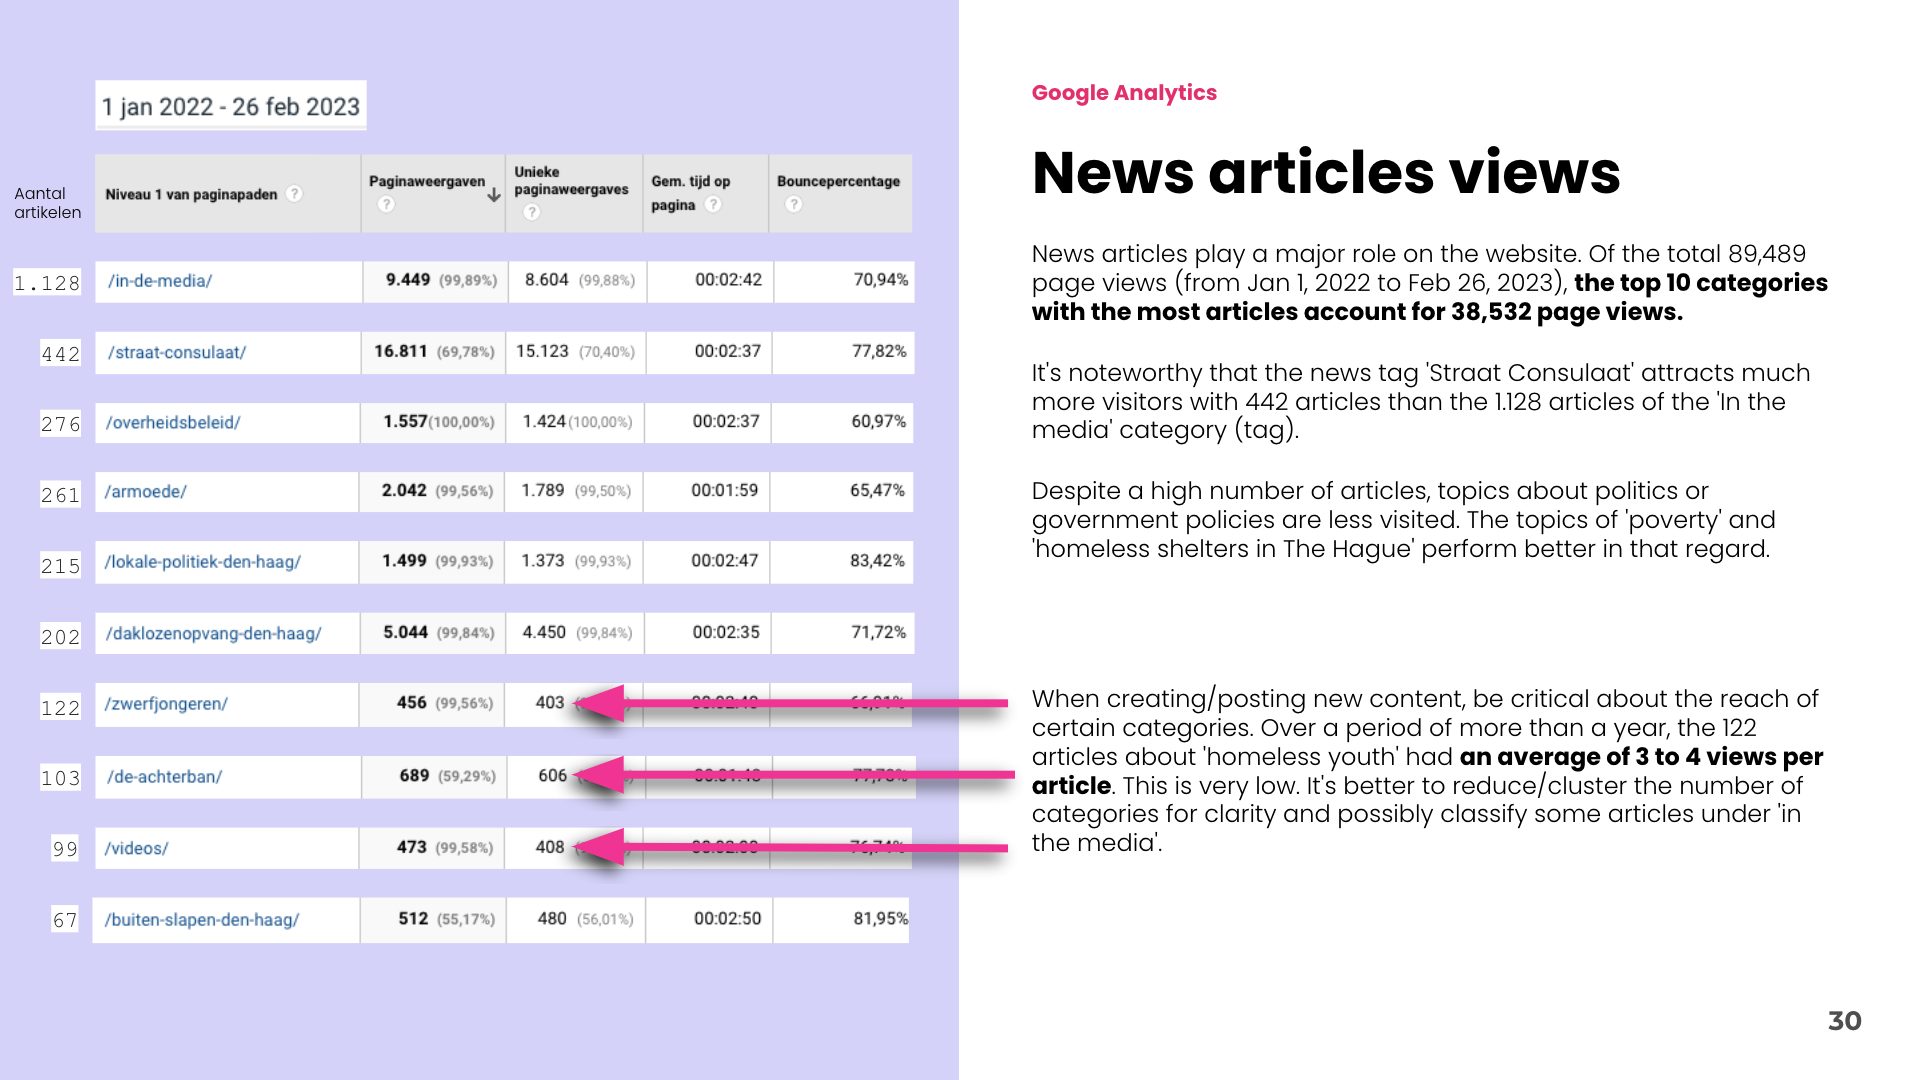 Google Analytics insights about the news articles